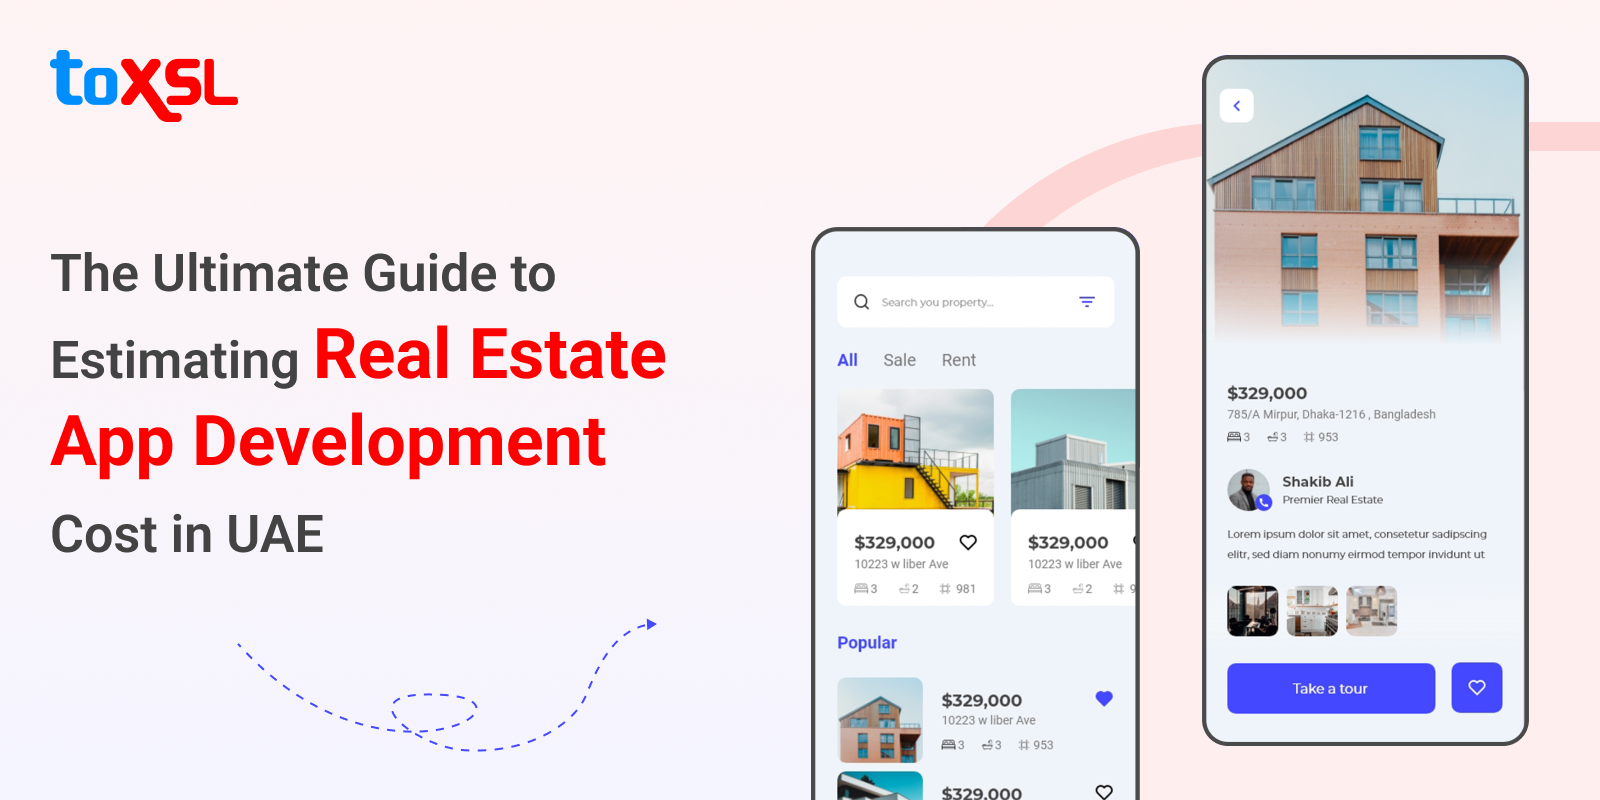 The Ultimate Guide to Estimating Real Estate App Development Cost in UAE